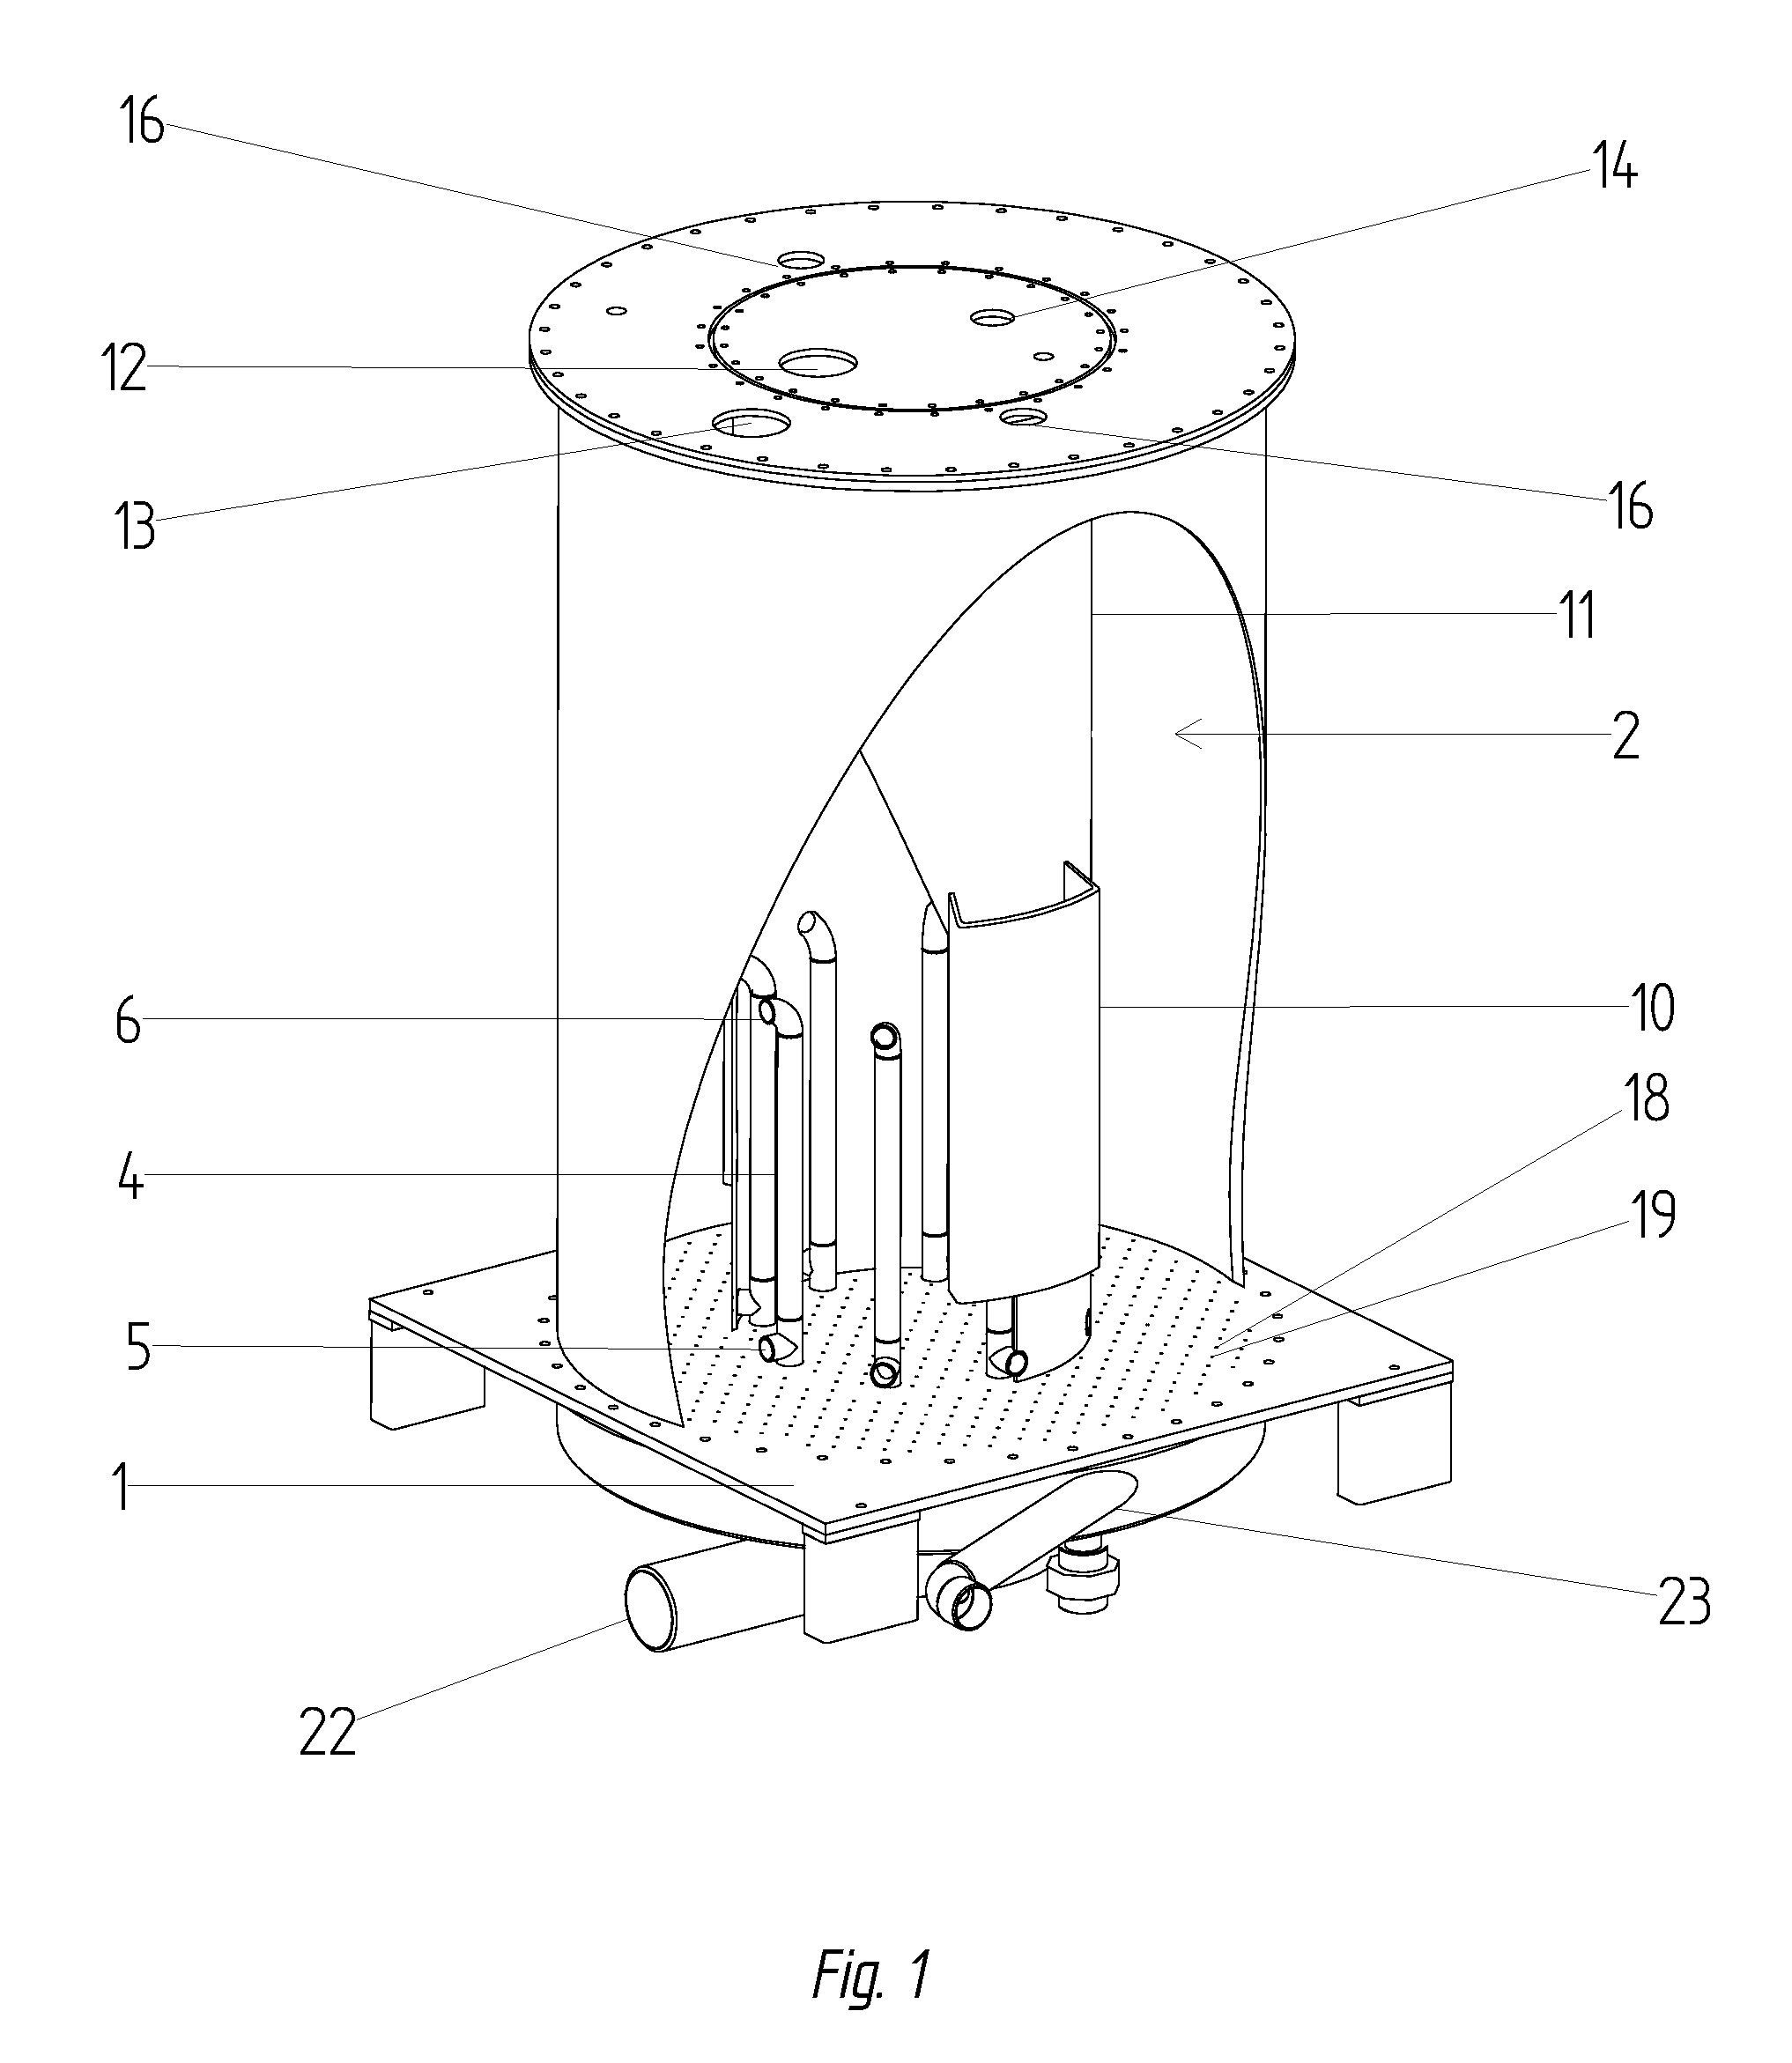 Apparatus and process for the pyrolysis of agricultural biomass